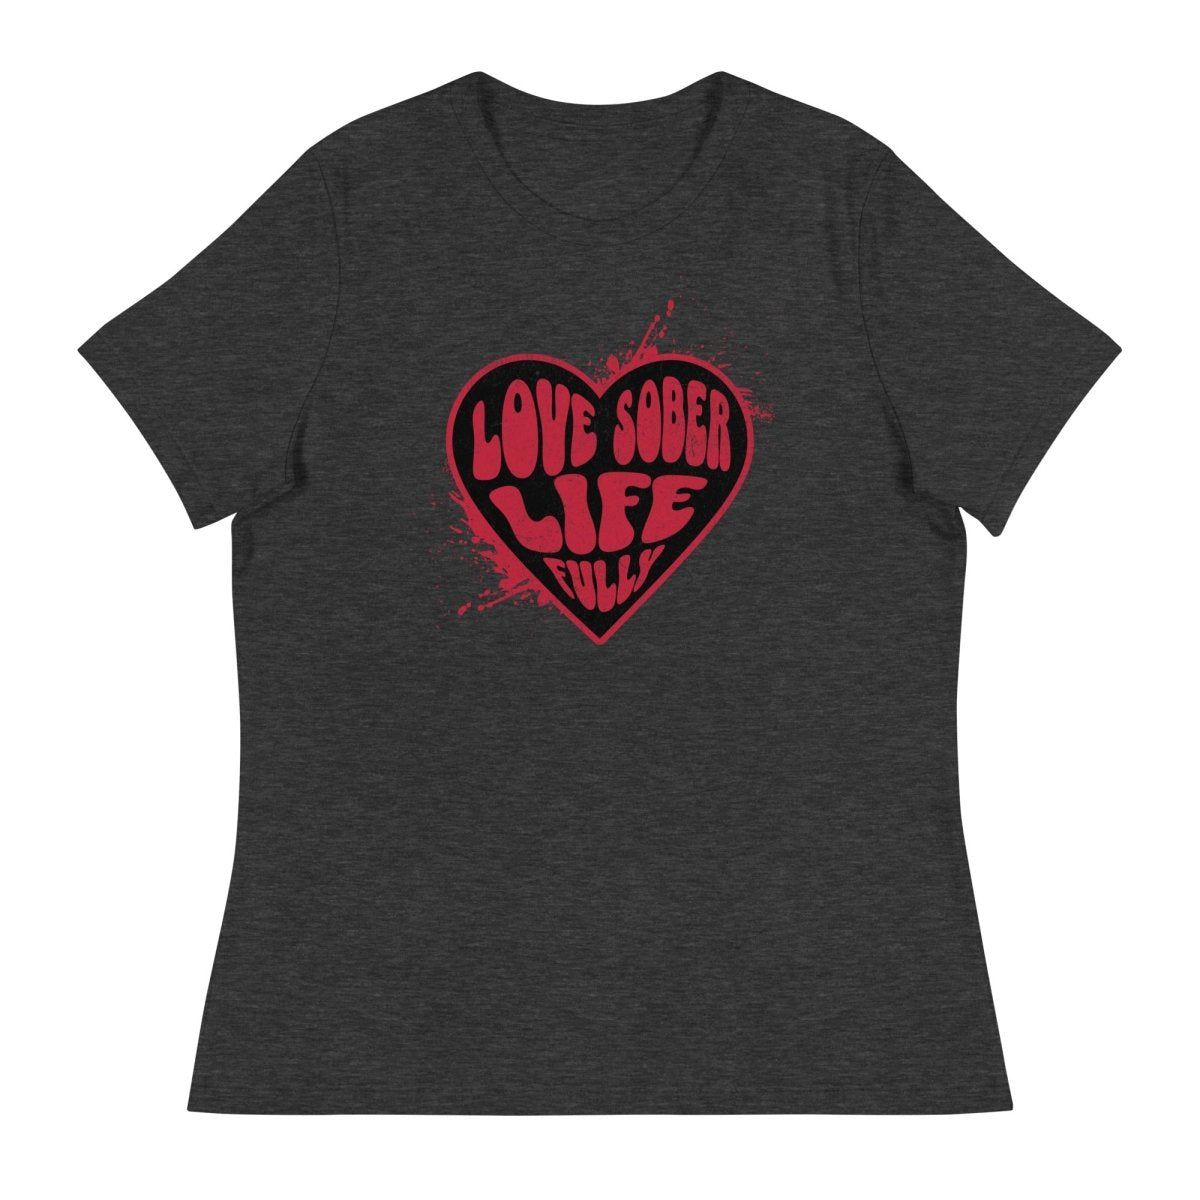 "Serenity & Strength" - 'Love Sober Life Fully' Women's Relaxed Fit T-Shirt - S | Sobervation